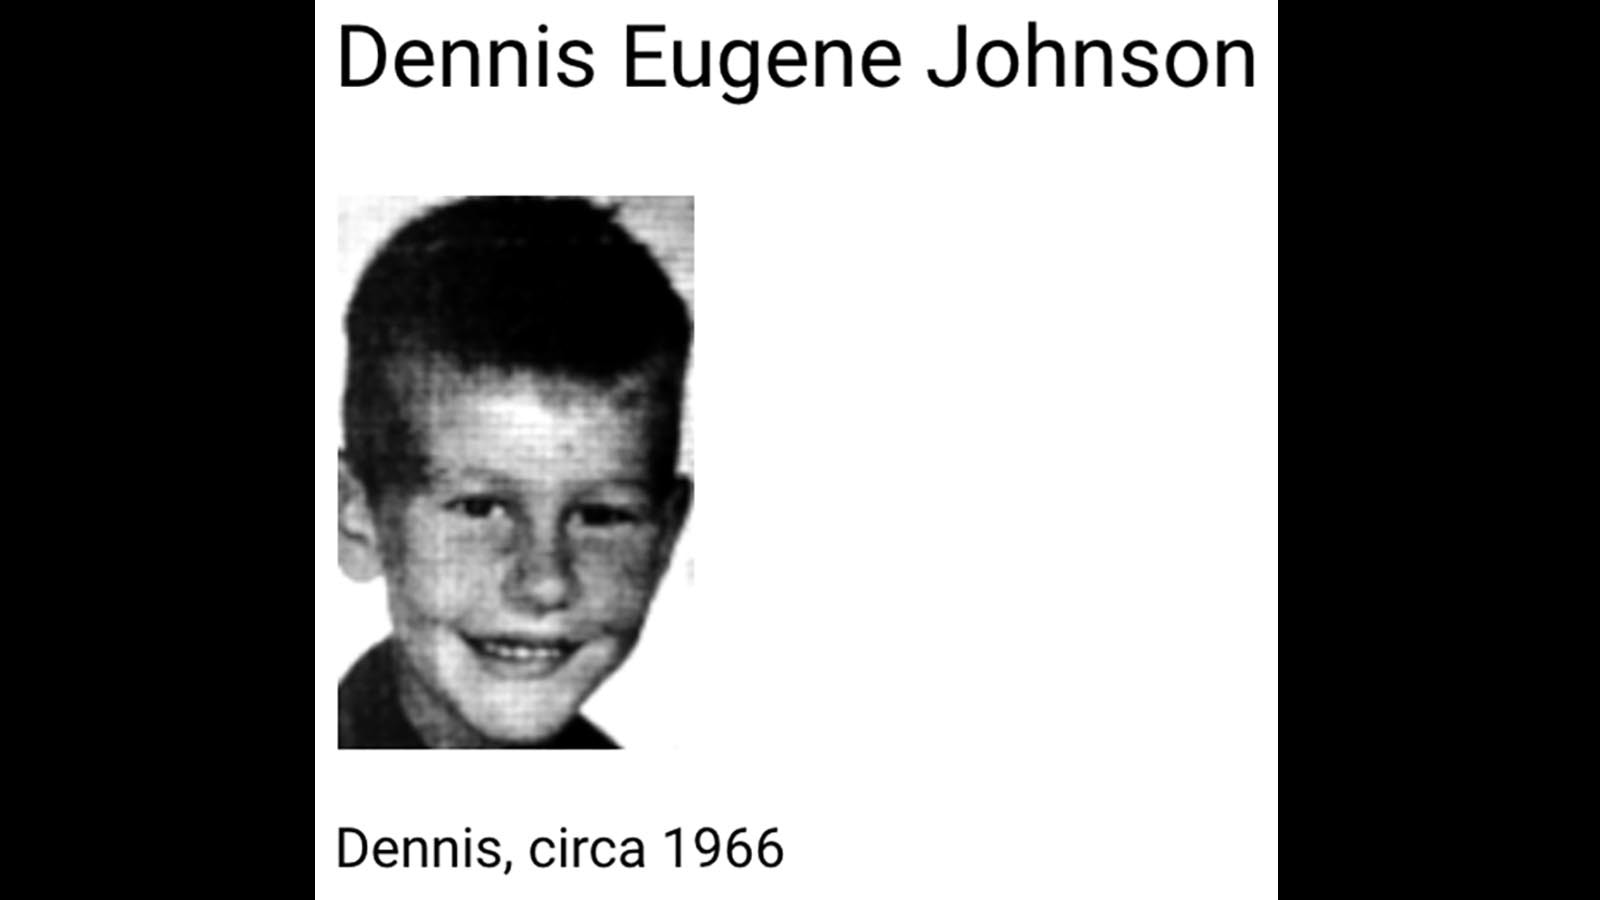 The largest search in Yellowstone National Park was for 8-year-old Dennis Johnson, who disappeared April 12, 1966.